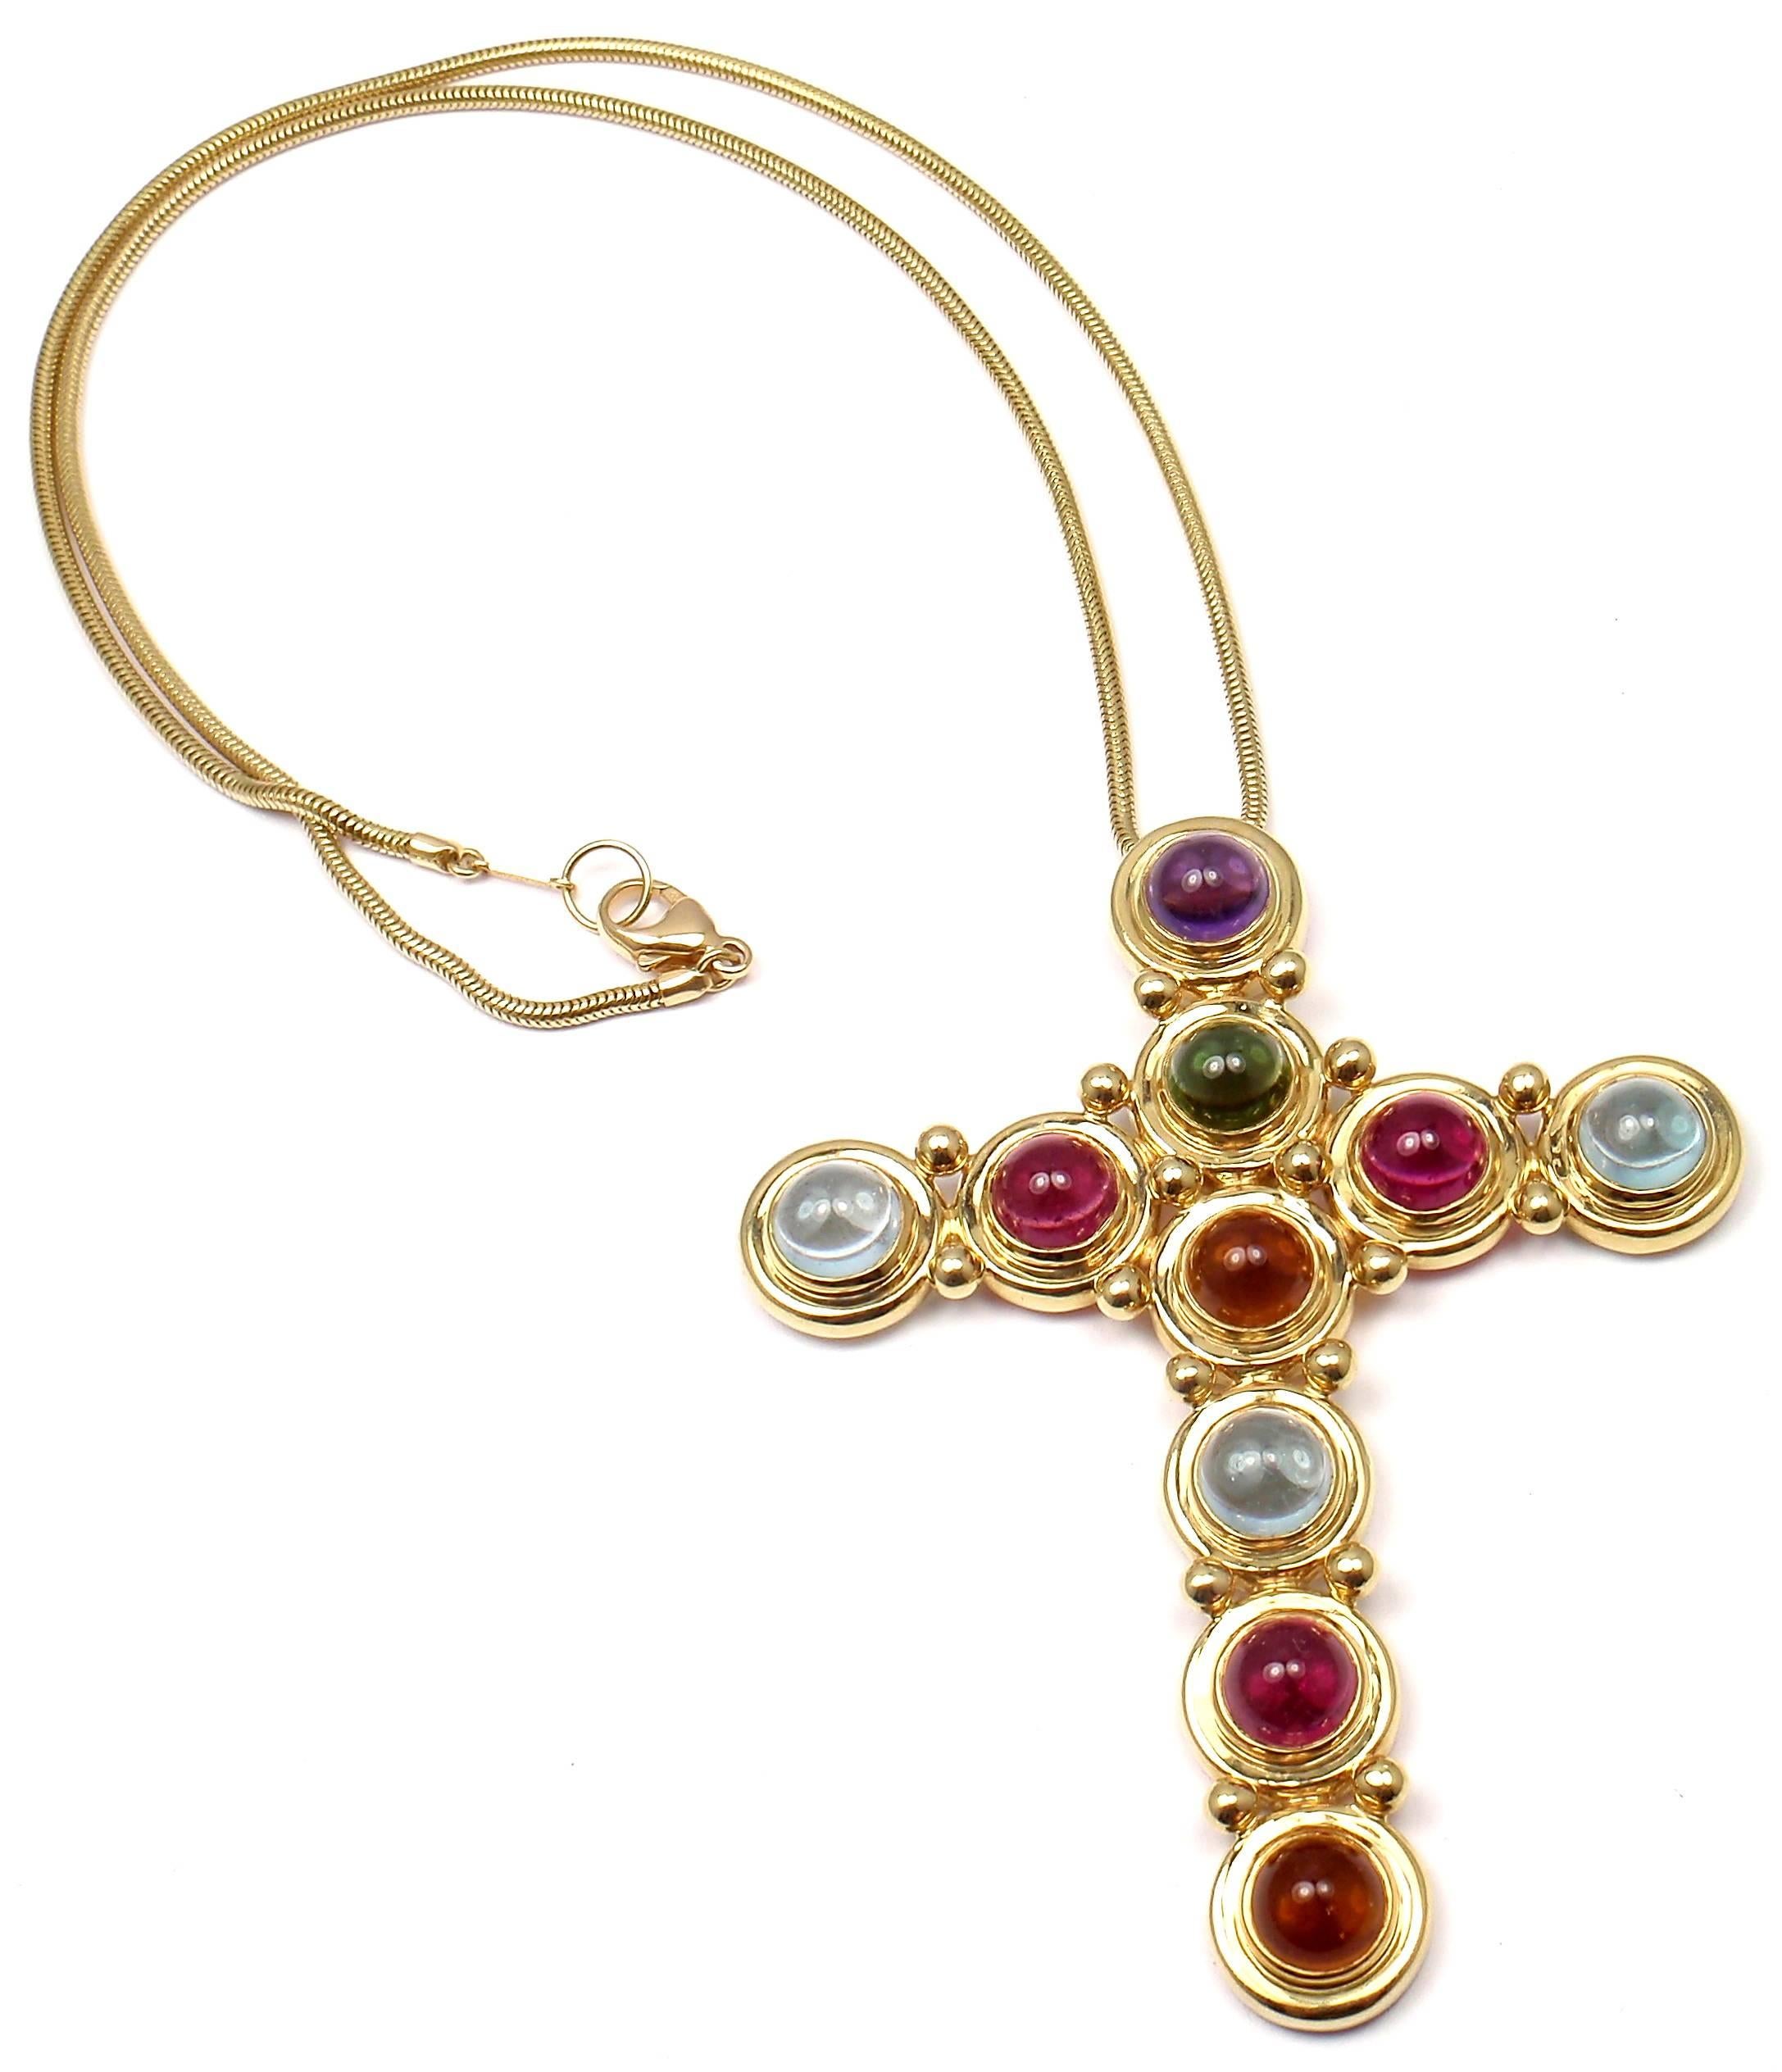 18k Yellow Gold Aquamarine Citrine Tourmaline Large Cross Necklace by Paloma Picasso for Tiffany & Co. 
With 3 round cabochon aquamarines 8mm each
3 round cabochon pink tourmalines 8mm each
1 round cabochon green tourmaline 8mm
2 round cabochon